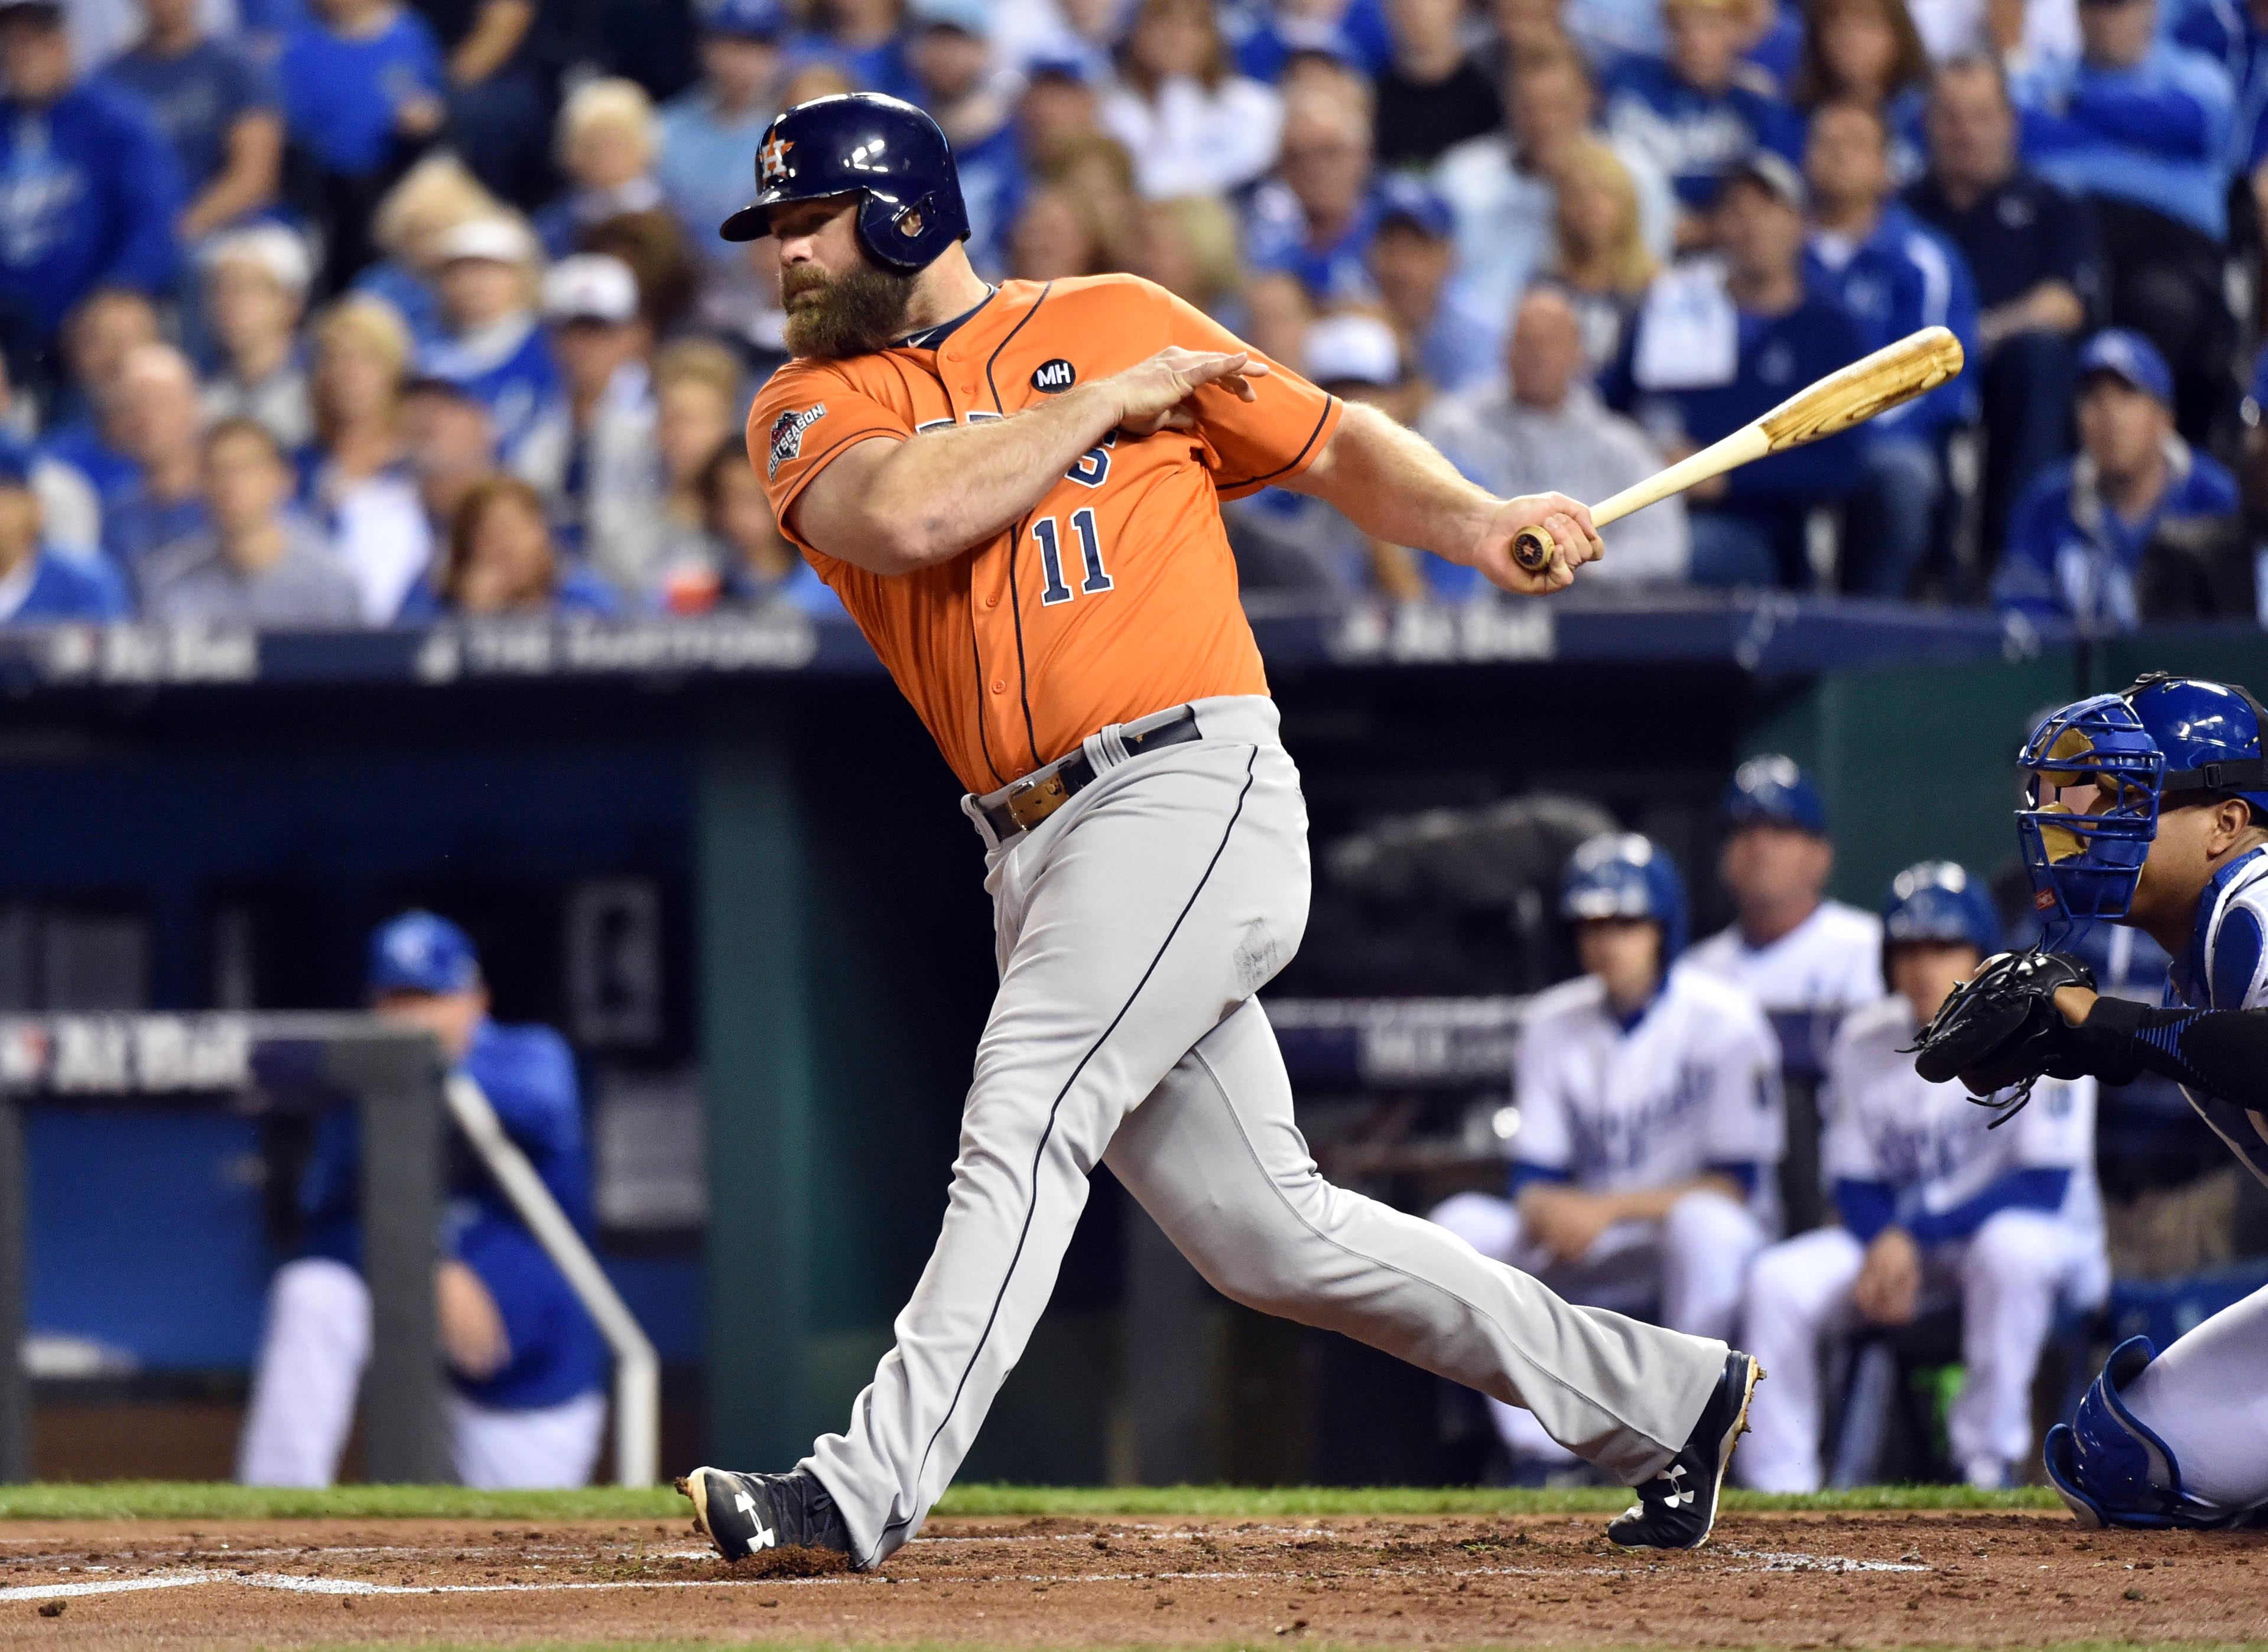 Astros' Evan Gattis completes his journey from custodian to World